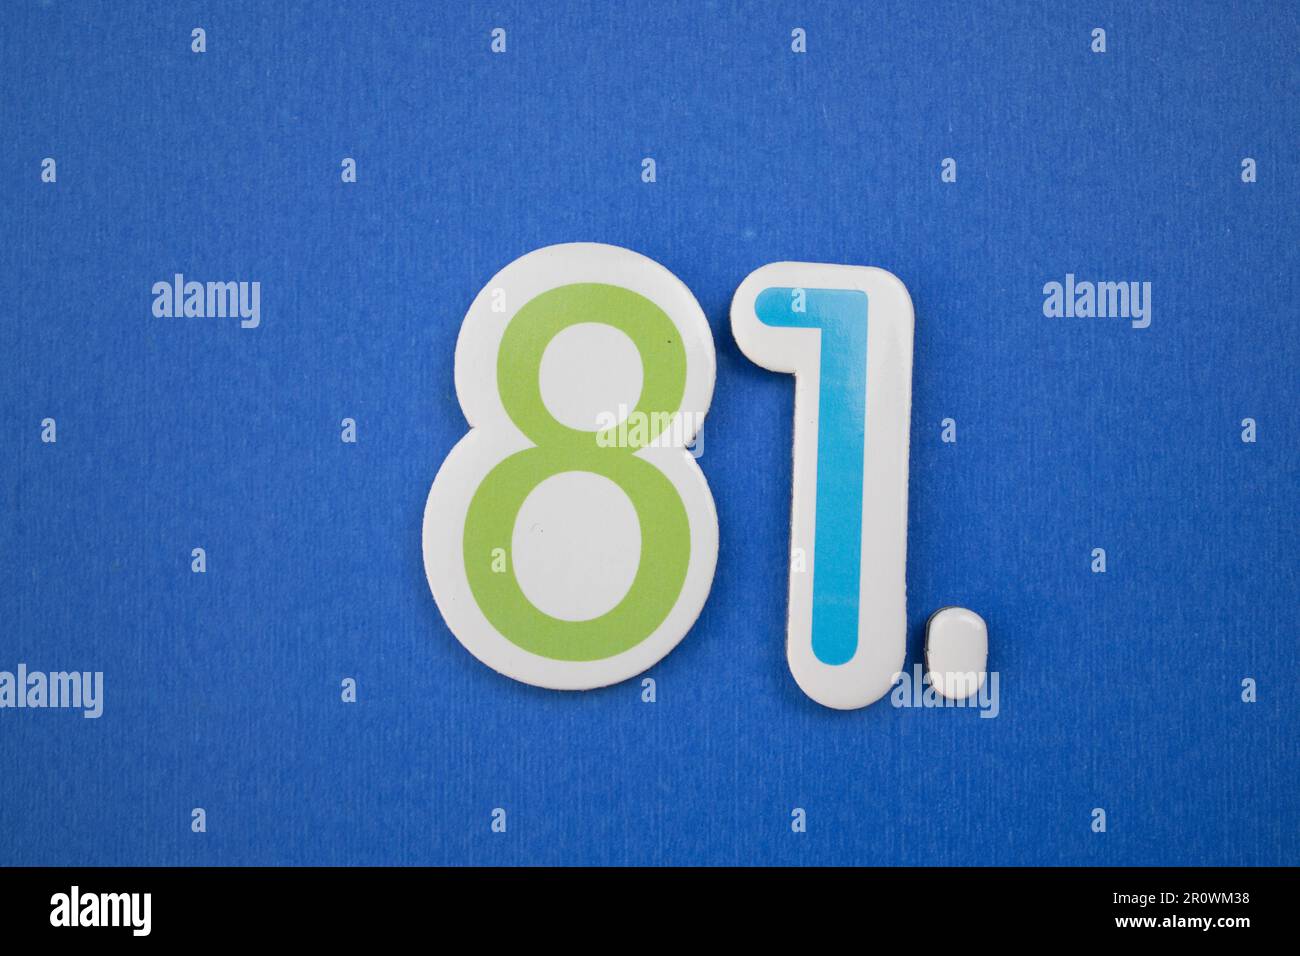 The number 81, placed on a blue background, photographed from above, colored green and light blue. Stock Photo